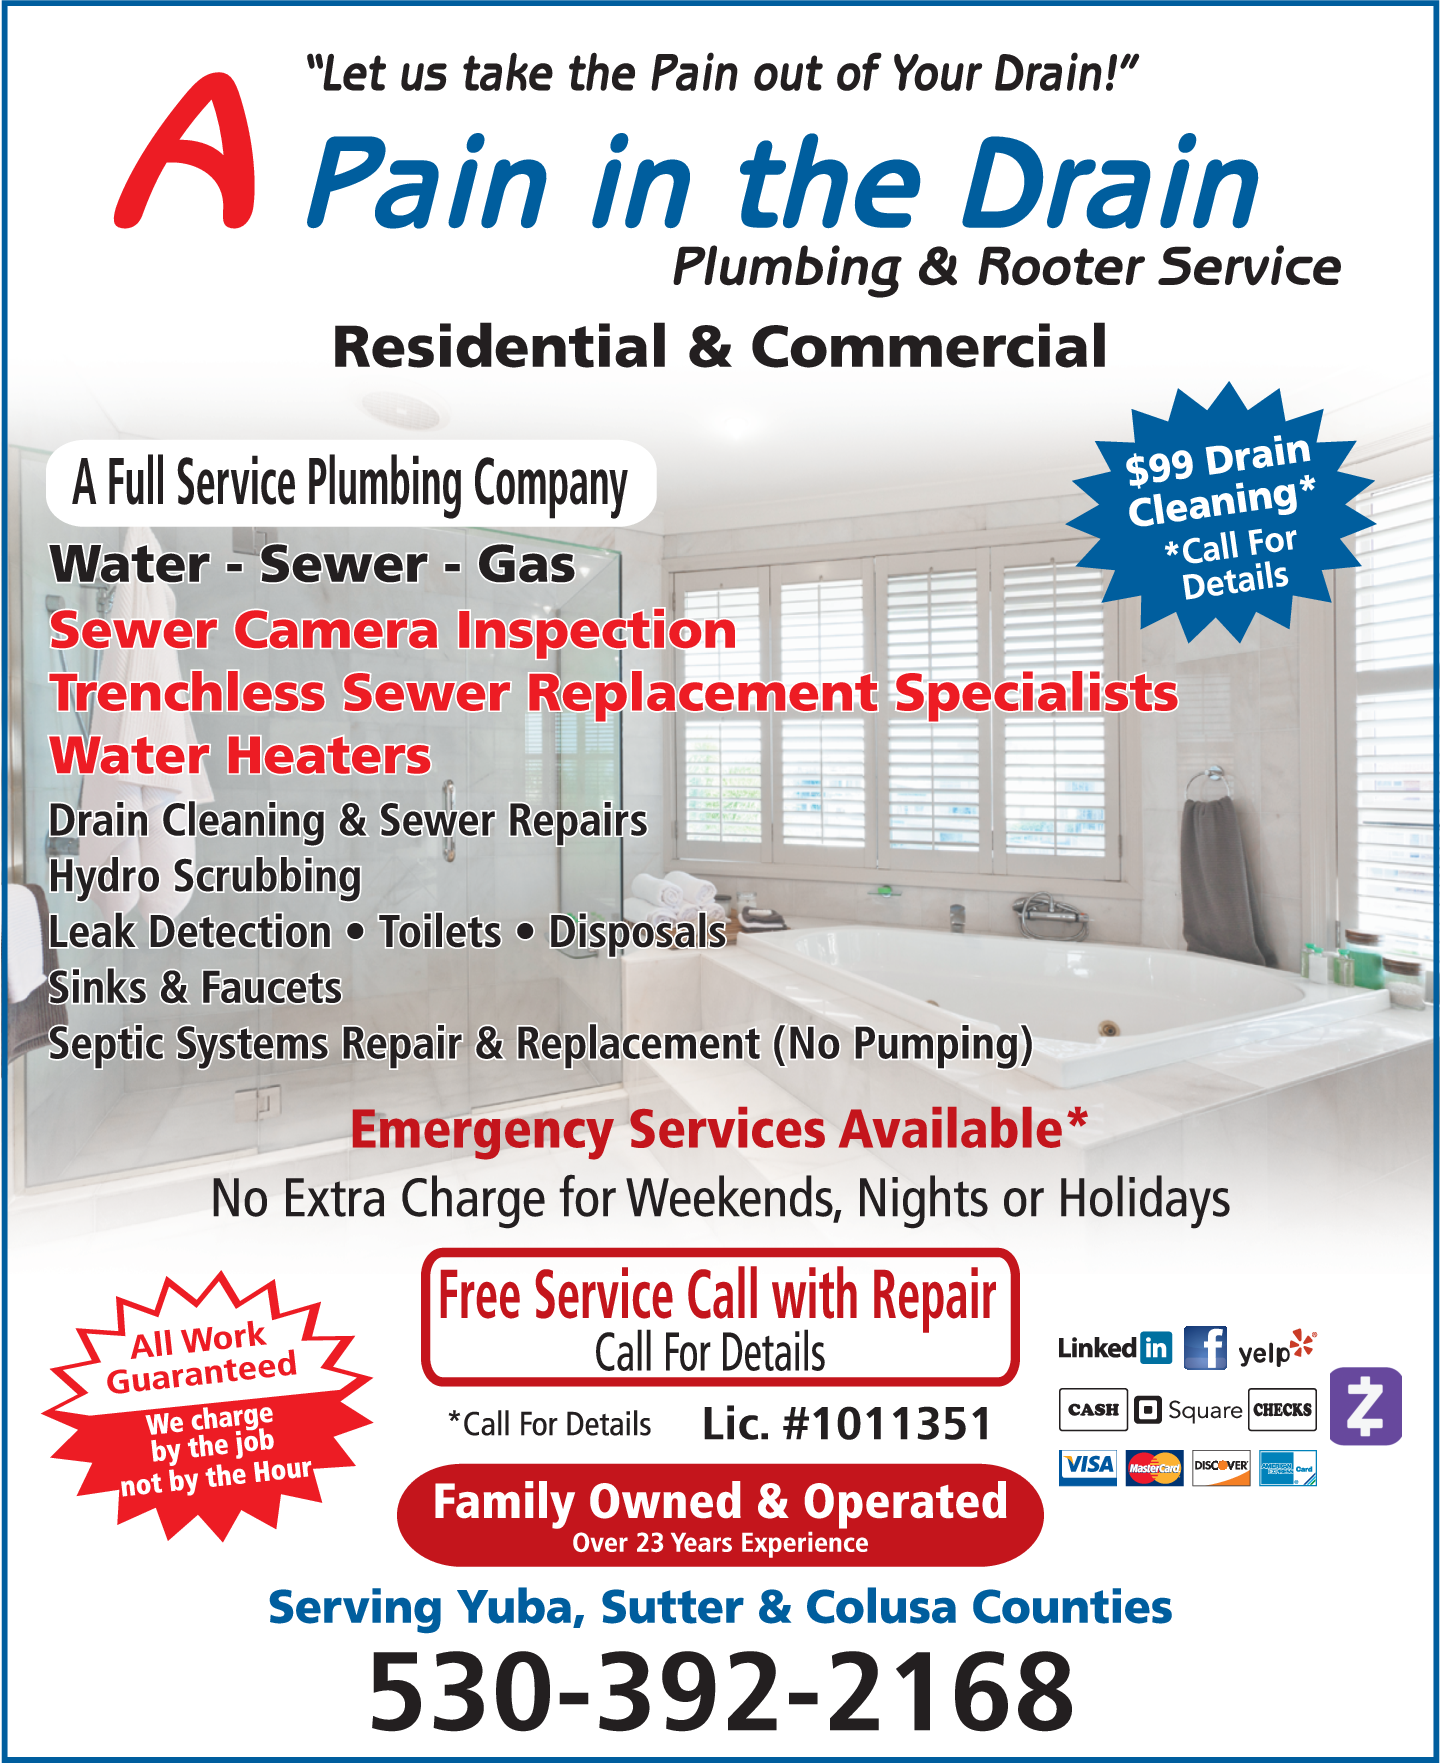 A Pain In The Drain Plumbing & Rooter Service